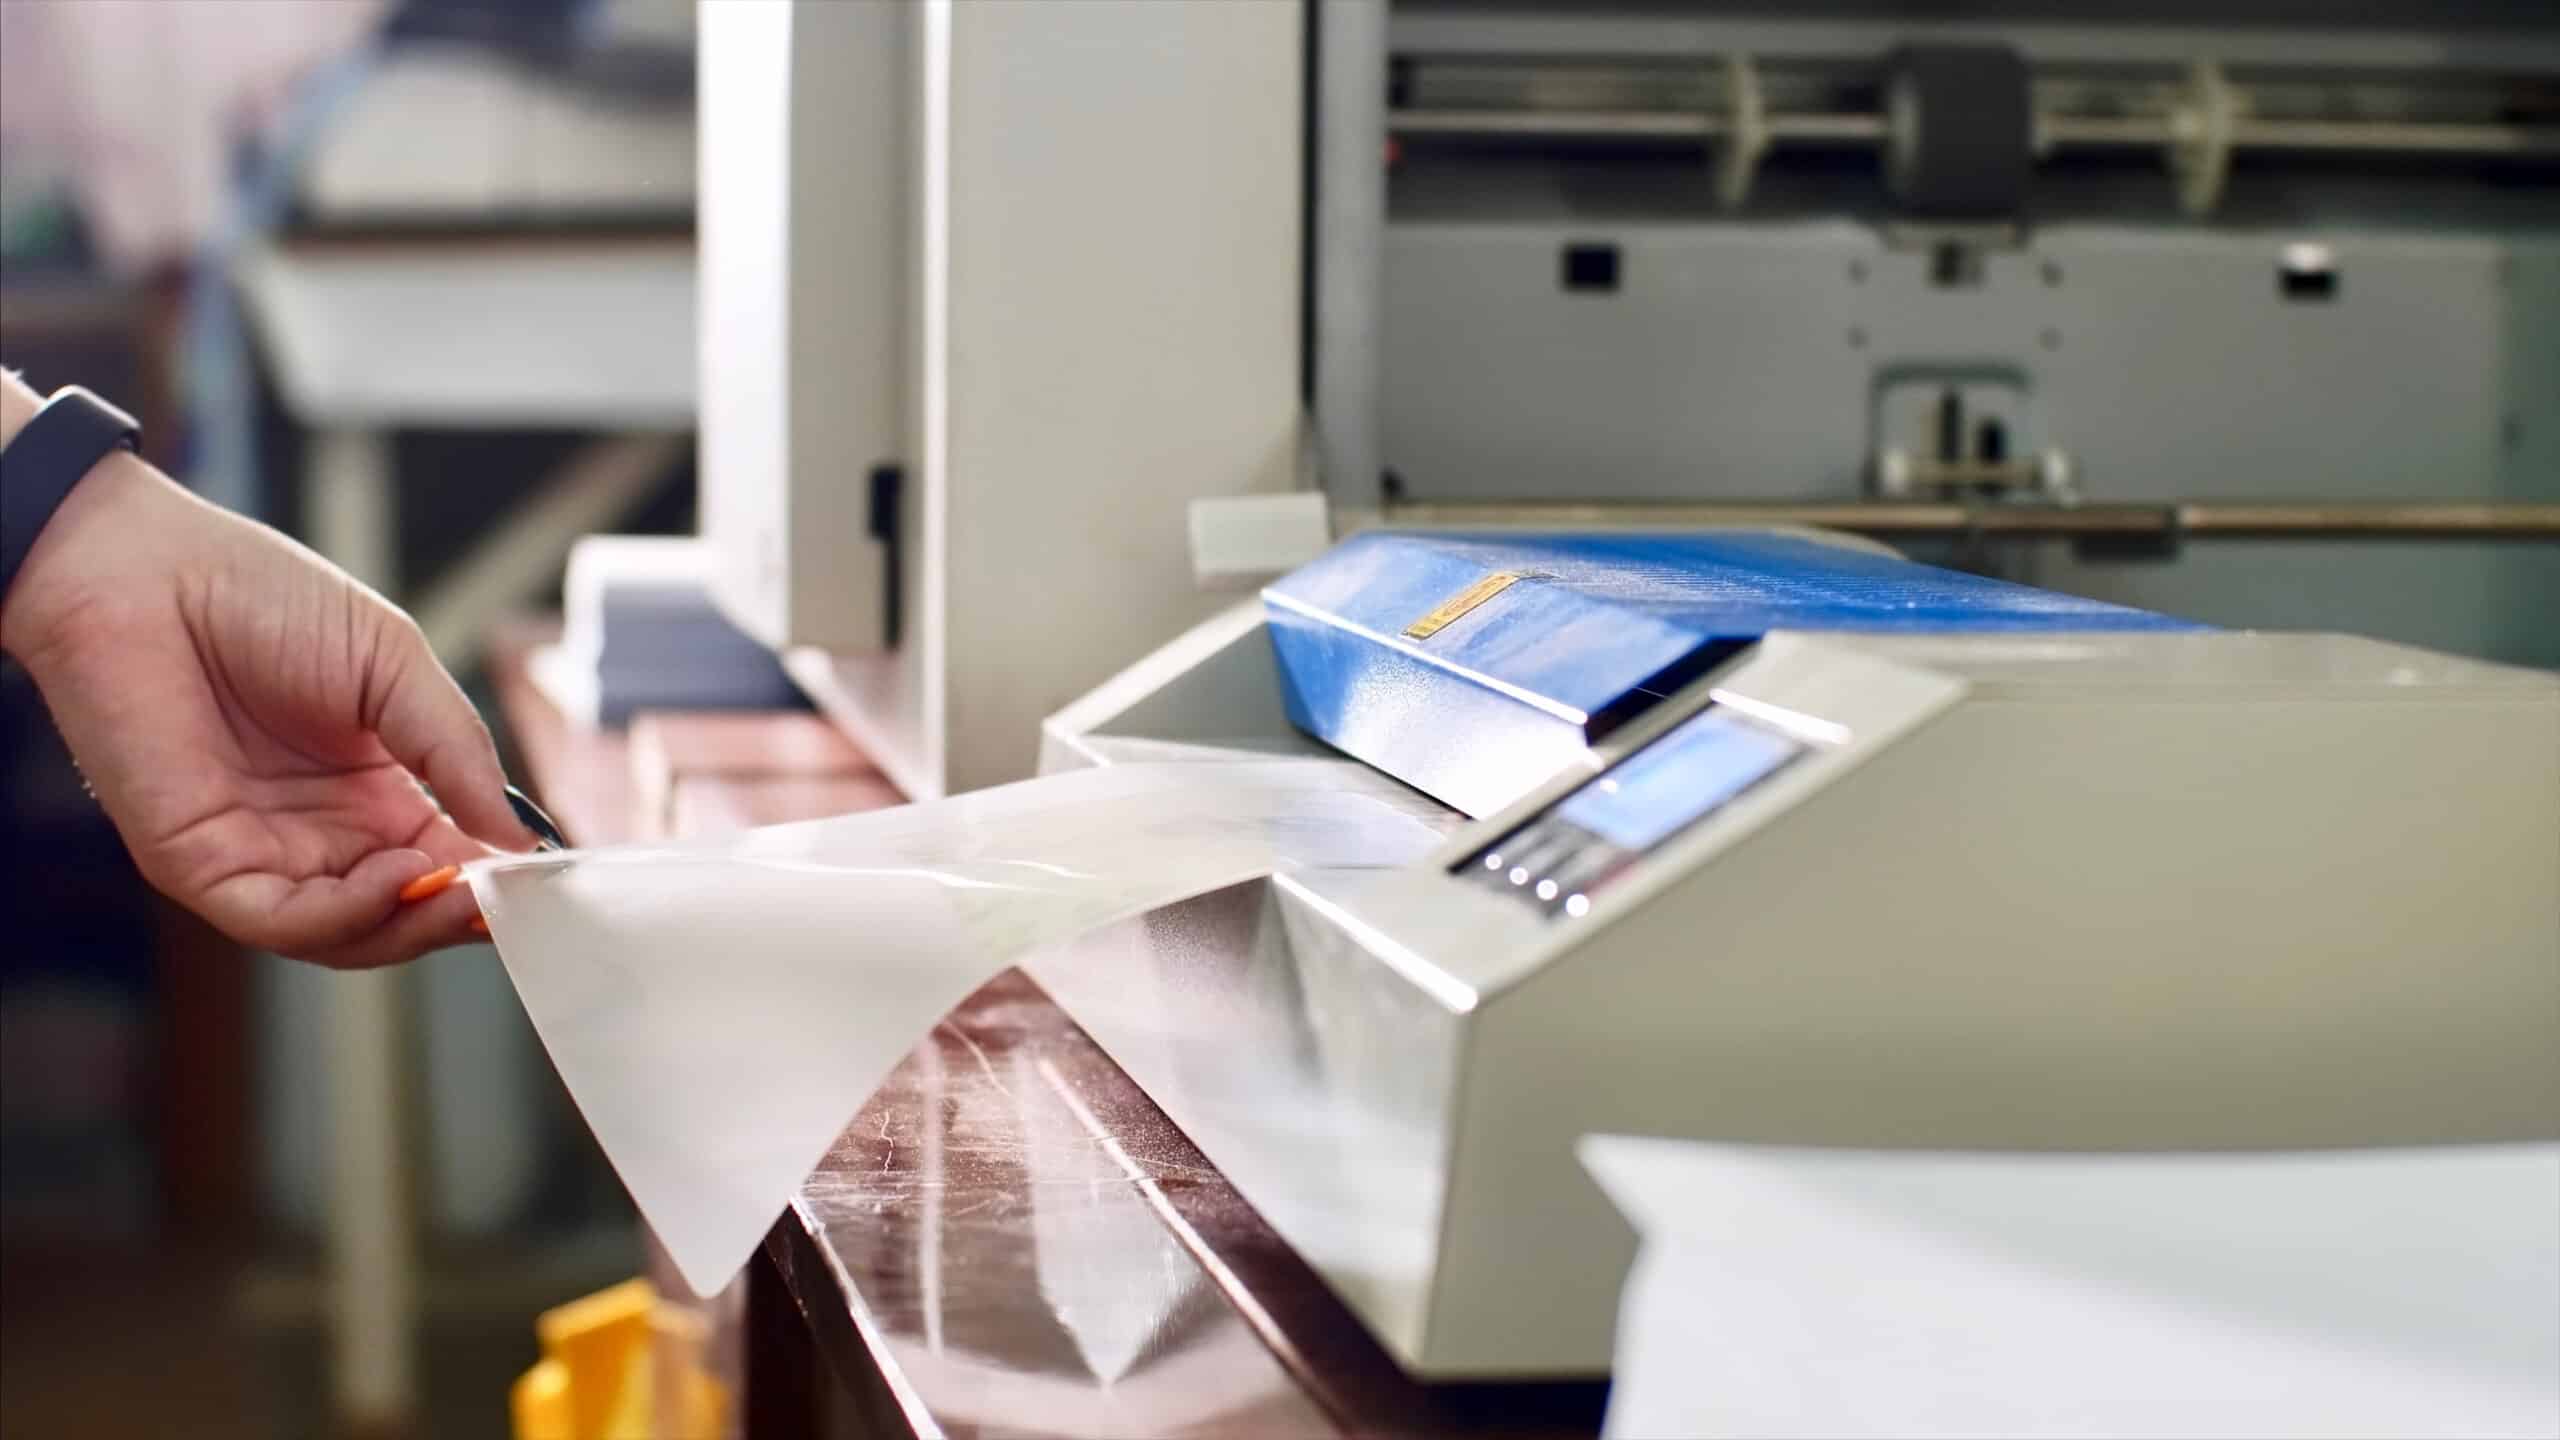 5 Reasons to Laminate Your Documents